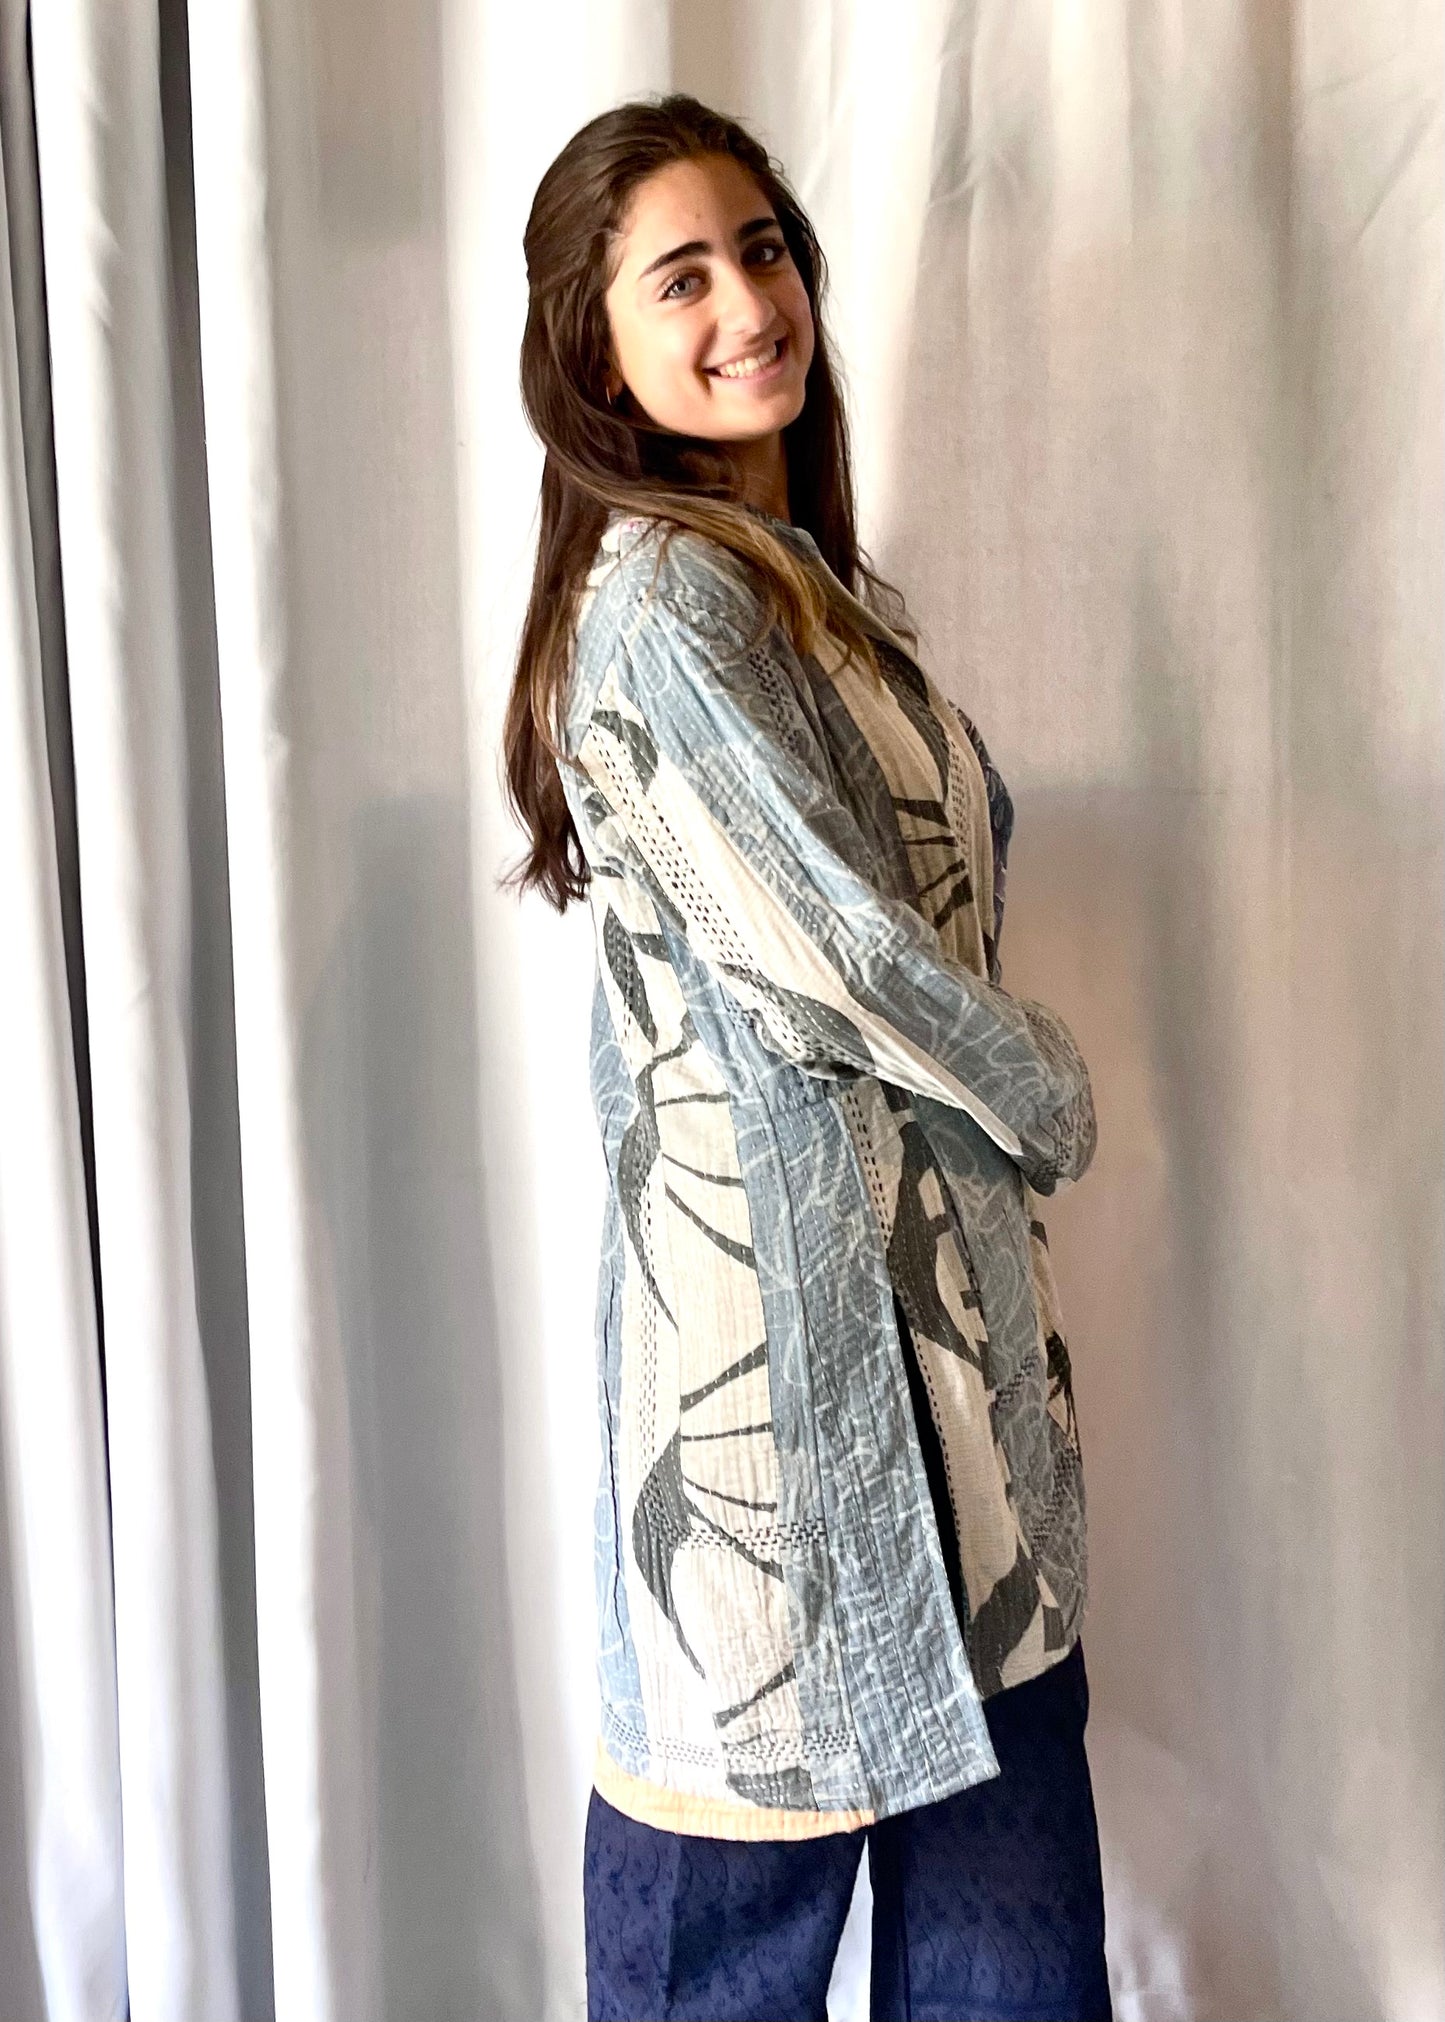 Blue and Grey Longline Kantha Quilted Jacket | Recycled Saris | Sustainable Fashion | Quilted Jacket | Kantha Embroidery | Handcrafted - DharBazaar